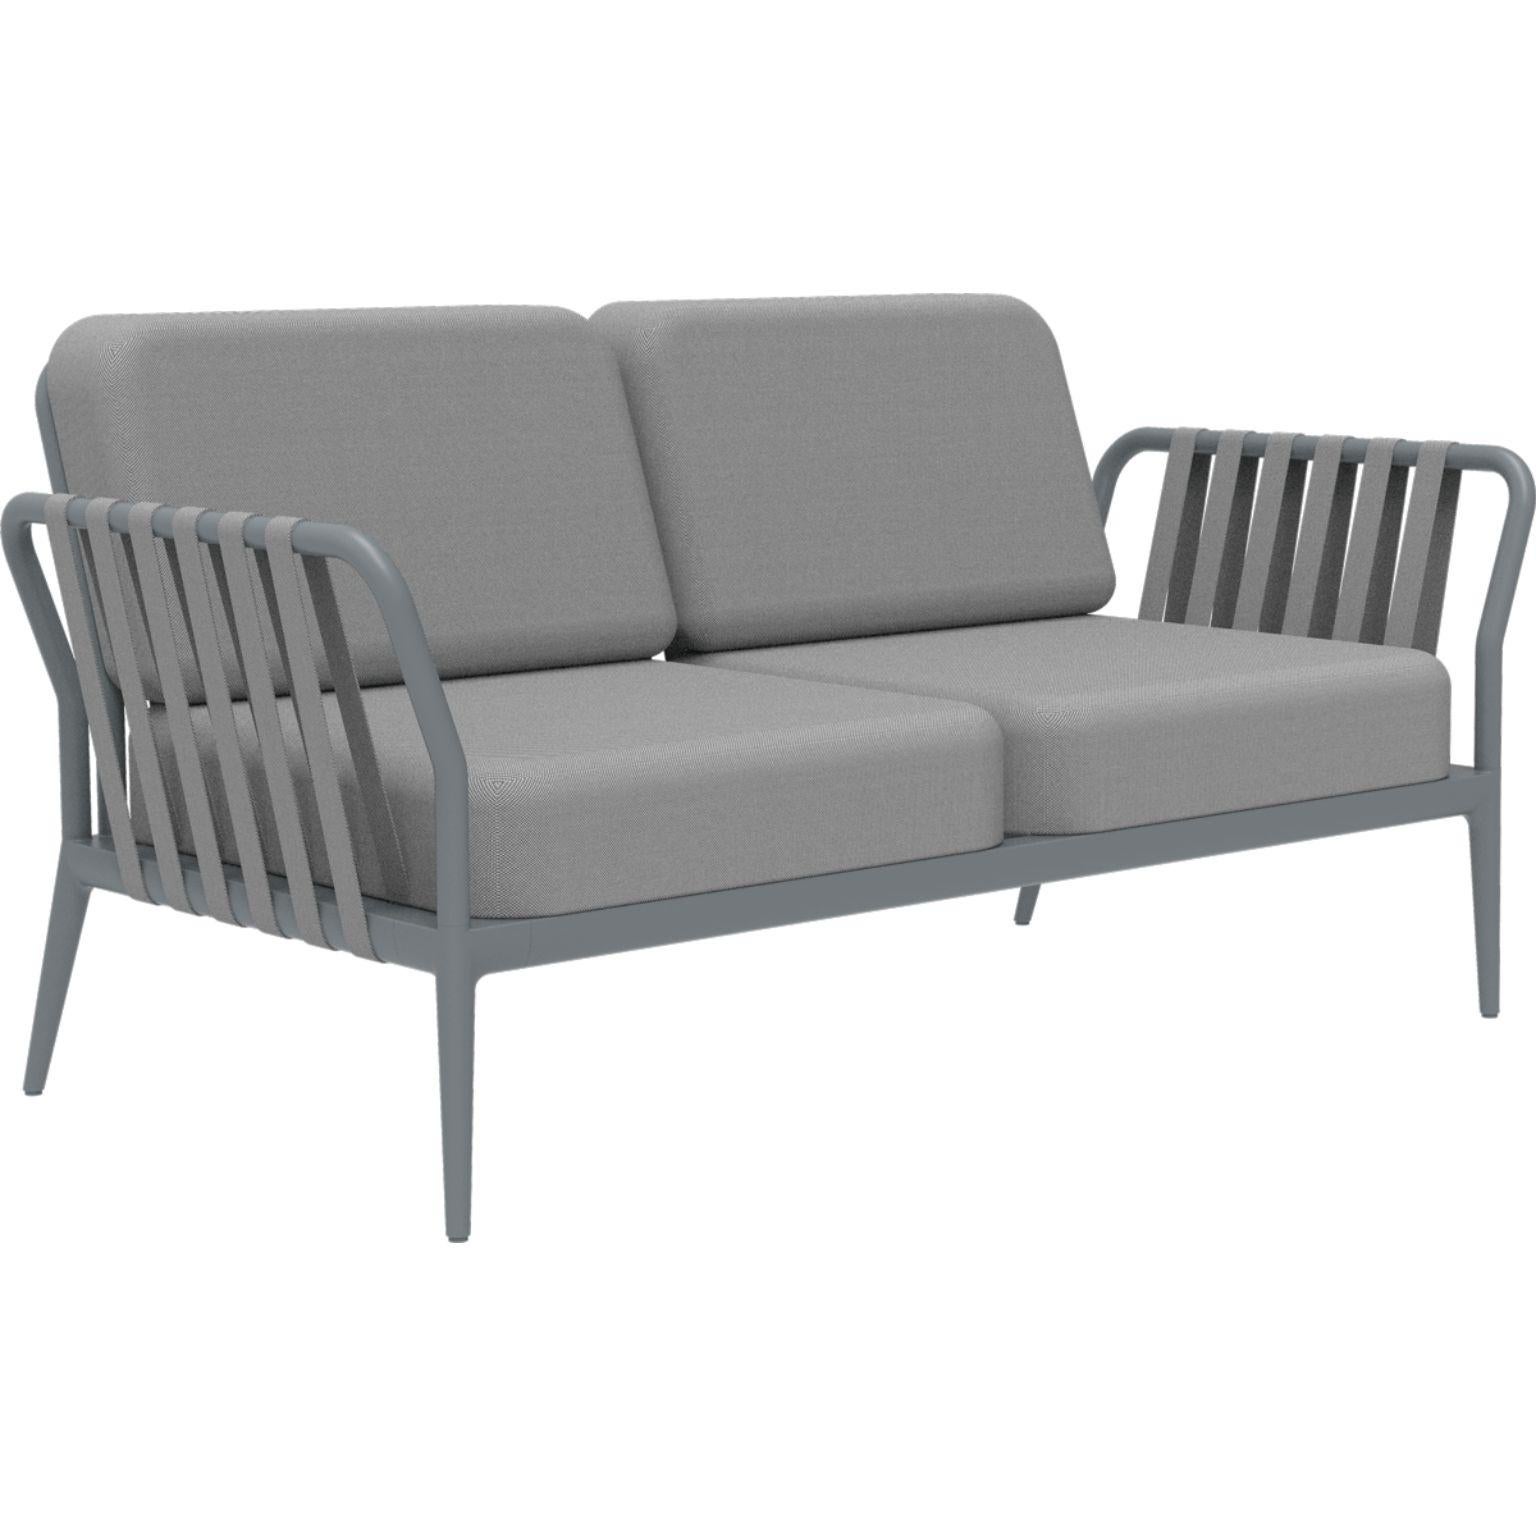 Ribbons grey sofa by Mowee.
Dimensions: D83 x W160 x H81 cm.
Material: Aluminium, upholstery.
Weight: 32 kg
Also available in different colors and finishes. 

An unmistakable collection for its beauty and robustness. A tribute to the Valencian